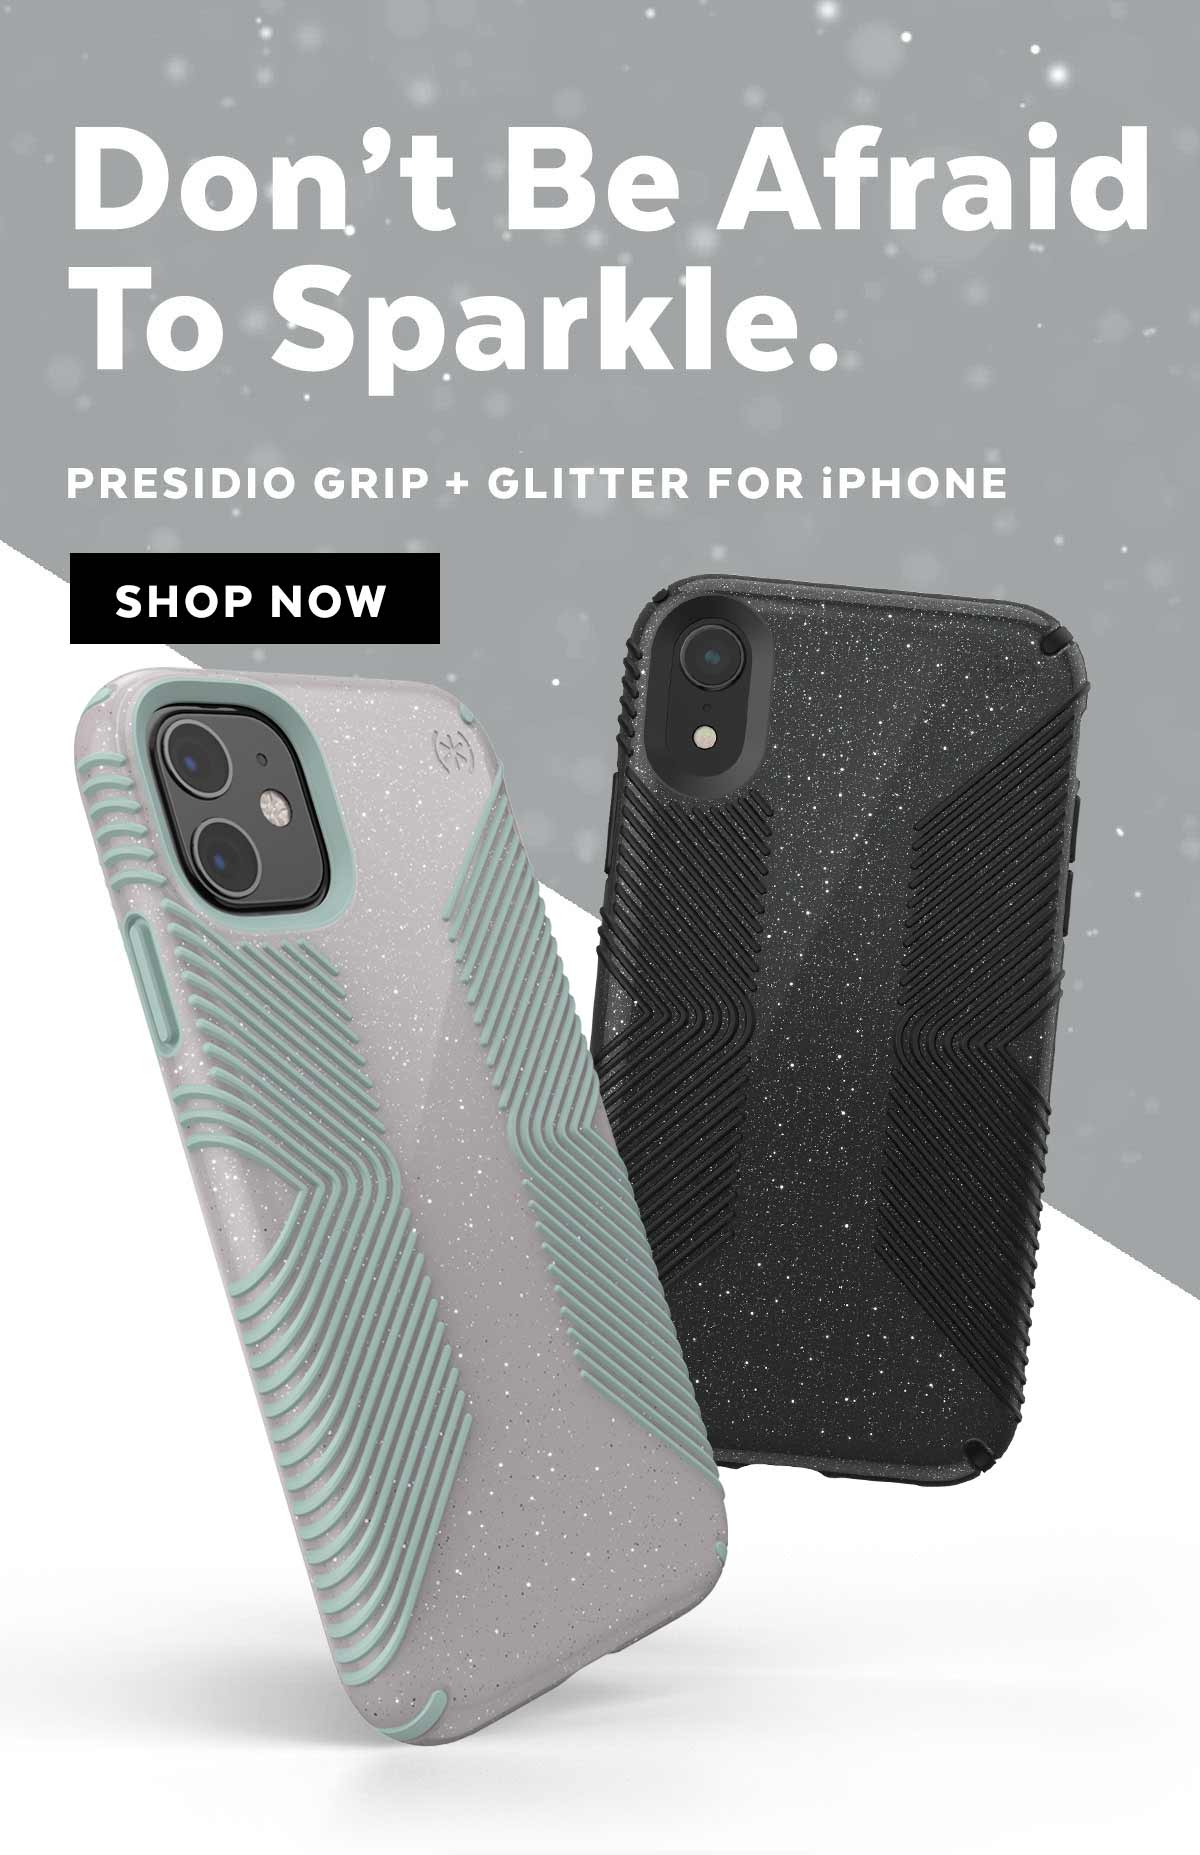 Don't be afraid to sparkle. Presidio Grip + Glitter for iPhone. Shop now!